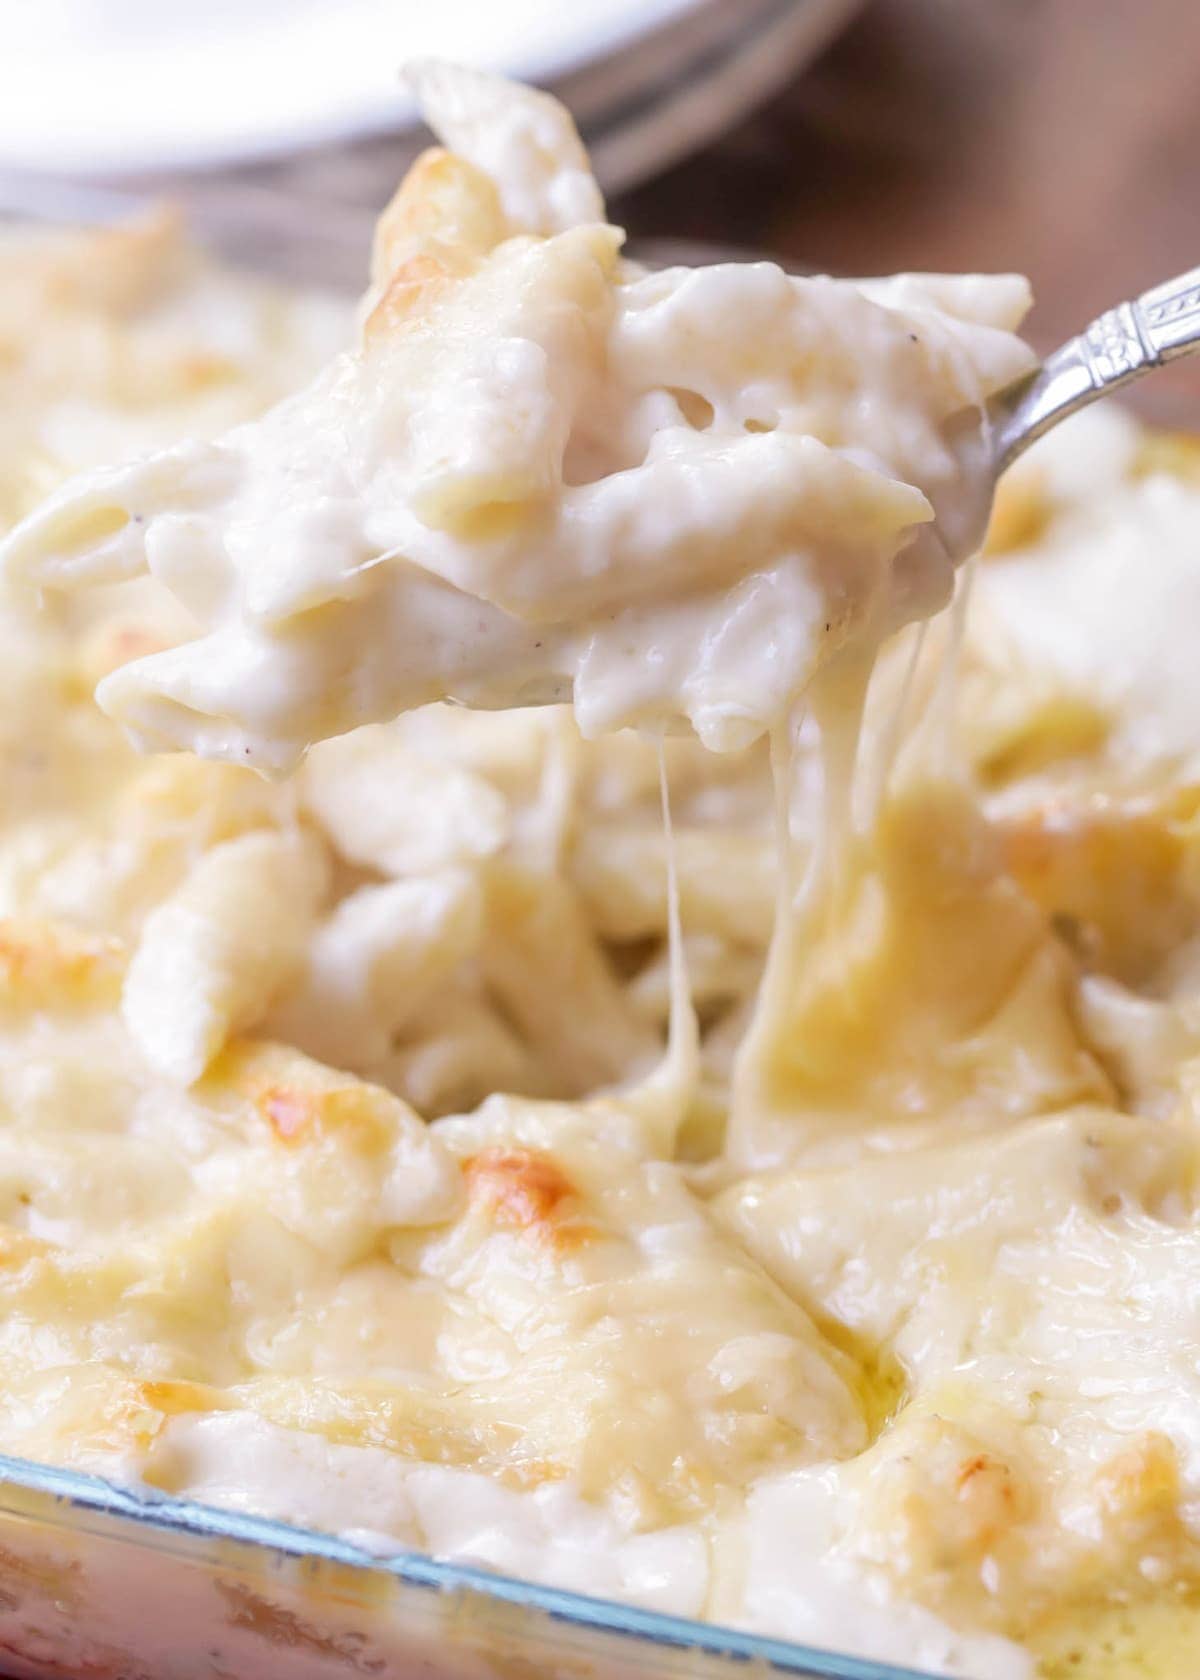 Christmas dinner ideas - close up of a scoop of baked macaroni and cheese.